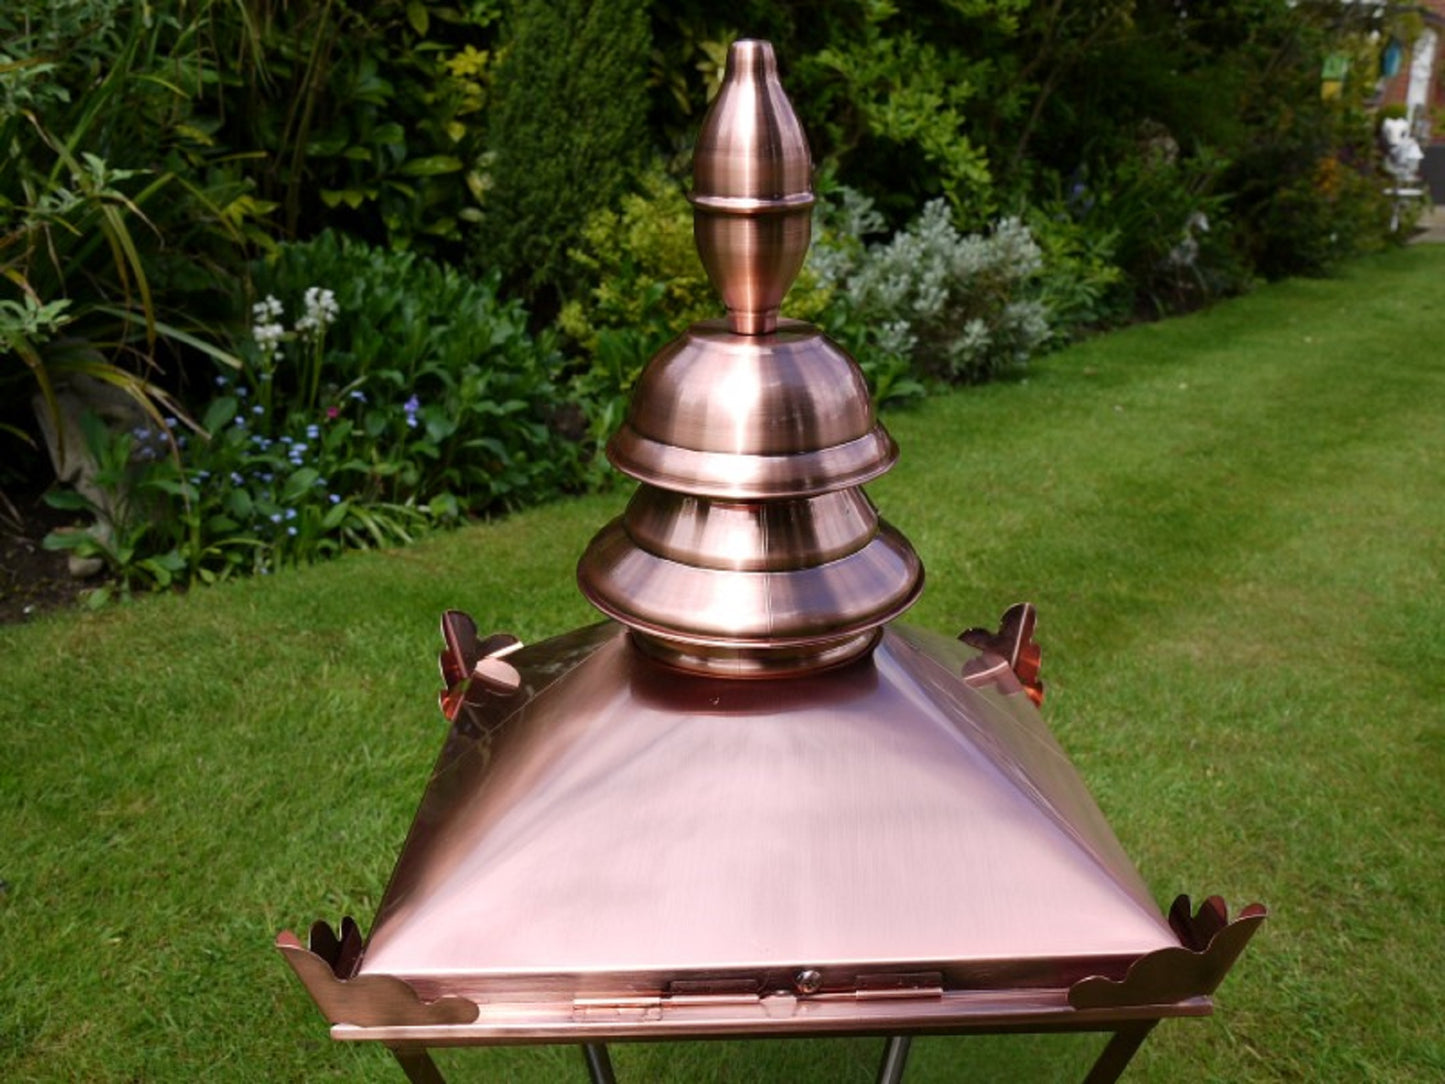 32"x15" Satin Brushed Copper Finish Victorian Style Lantern Lamp Top